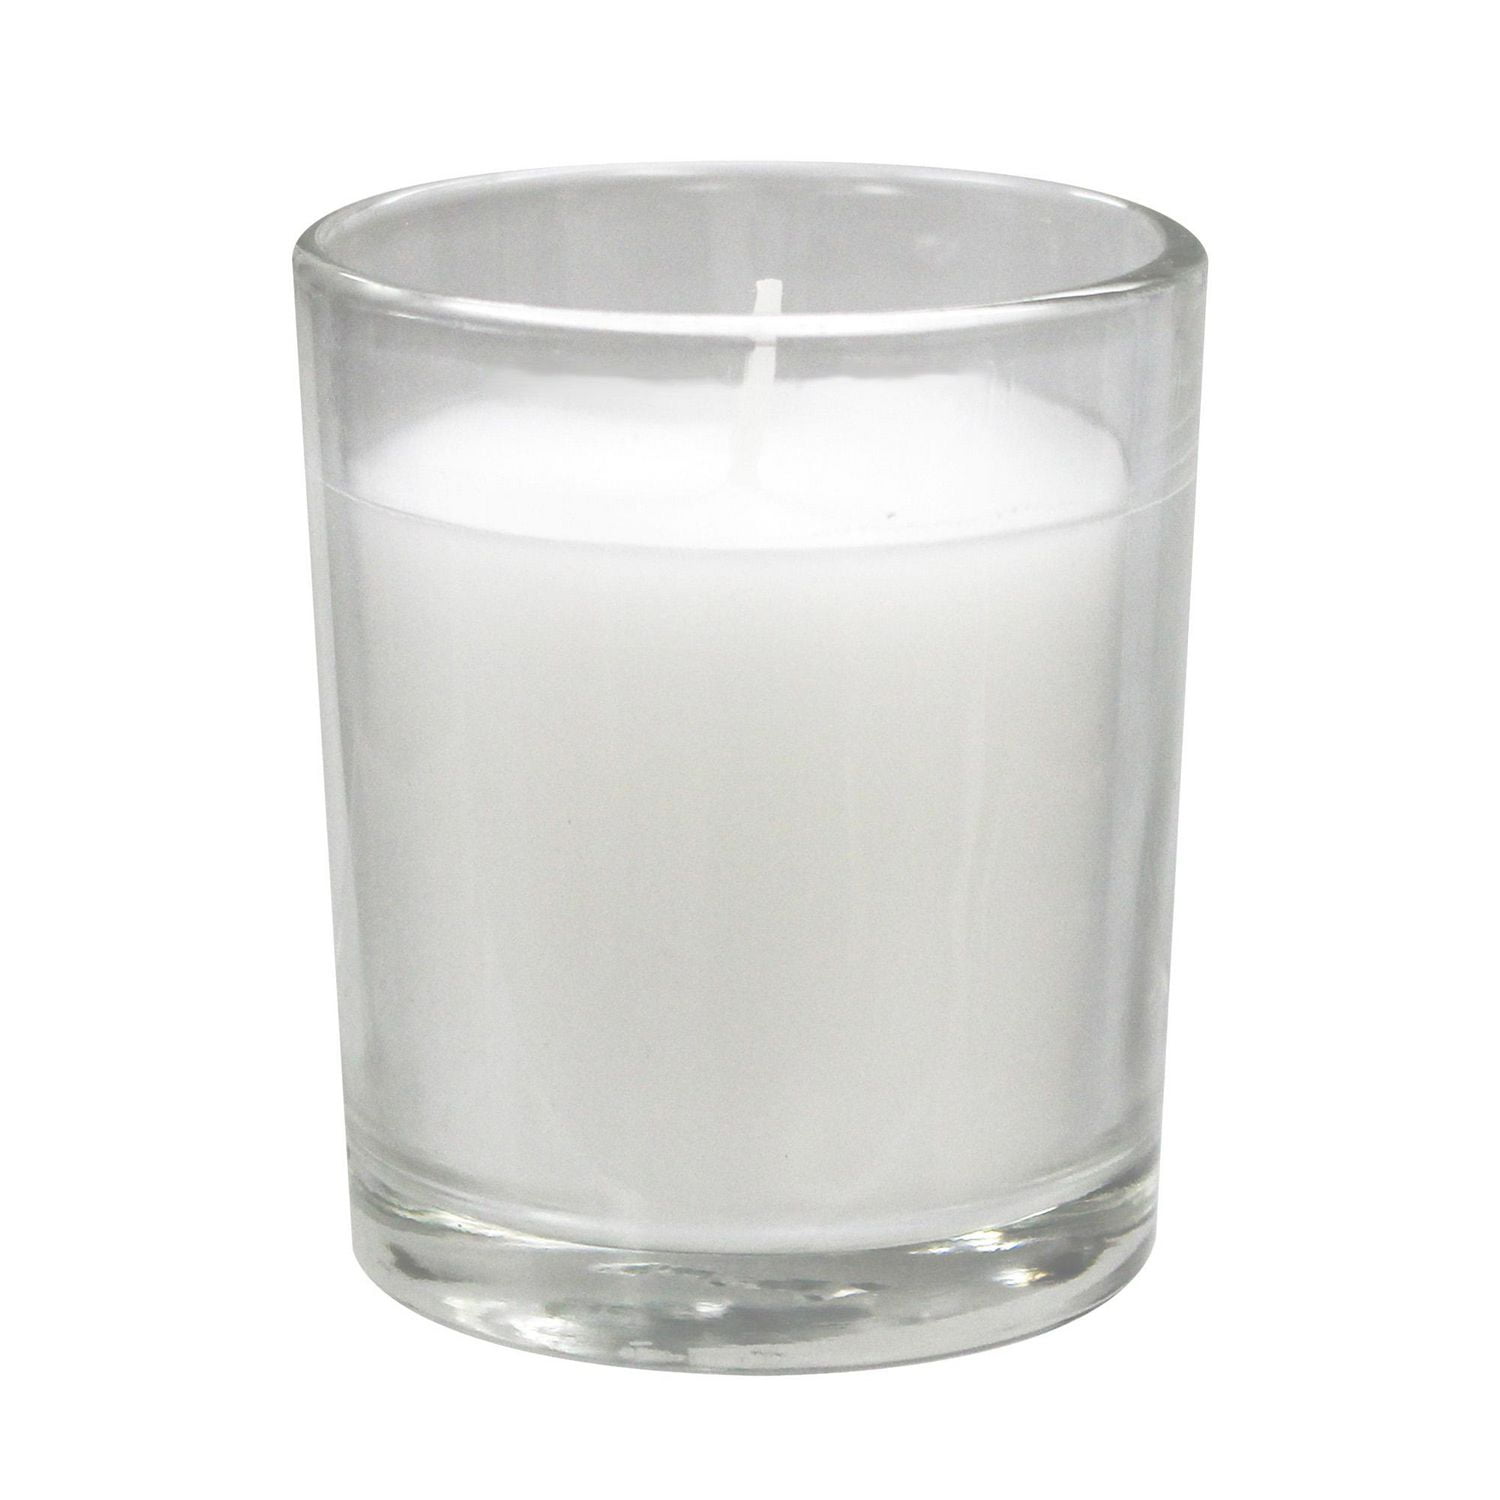 Hyoola White Votive Candles in Glass - Pack of 24 Votive Candle - 24 Hour  Burn Time - Unscented Votive Candles - Glass Votives